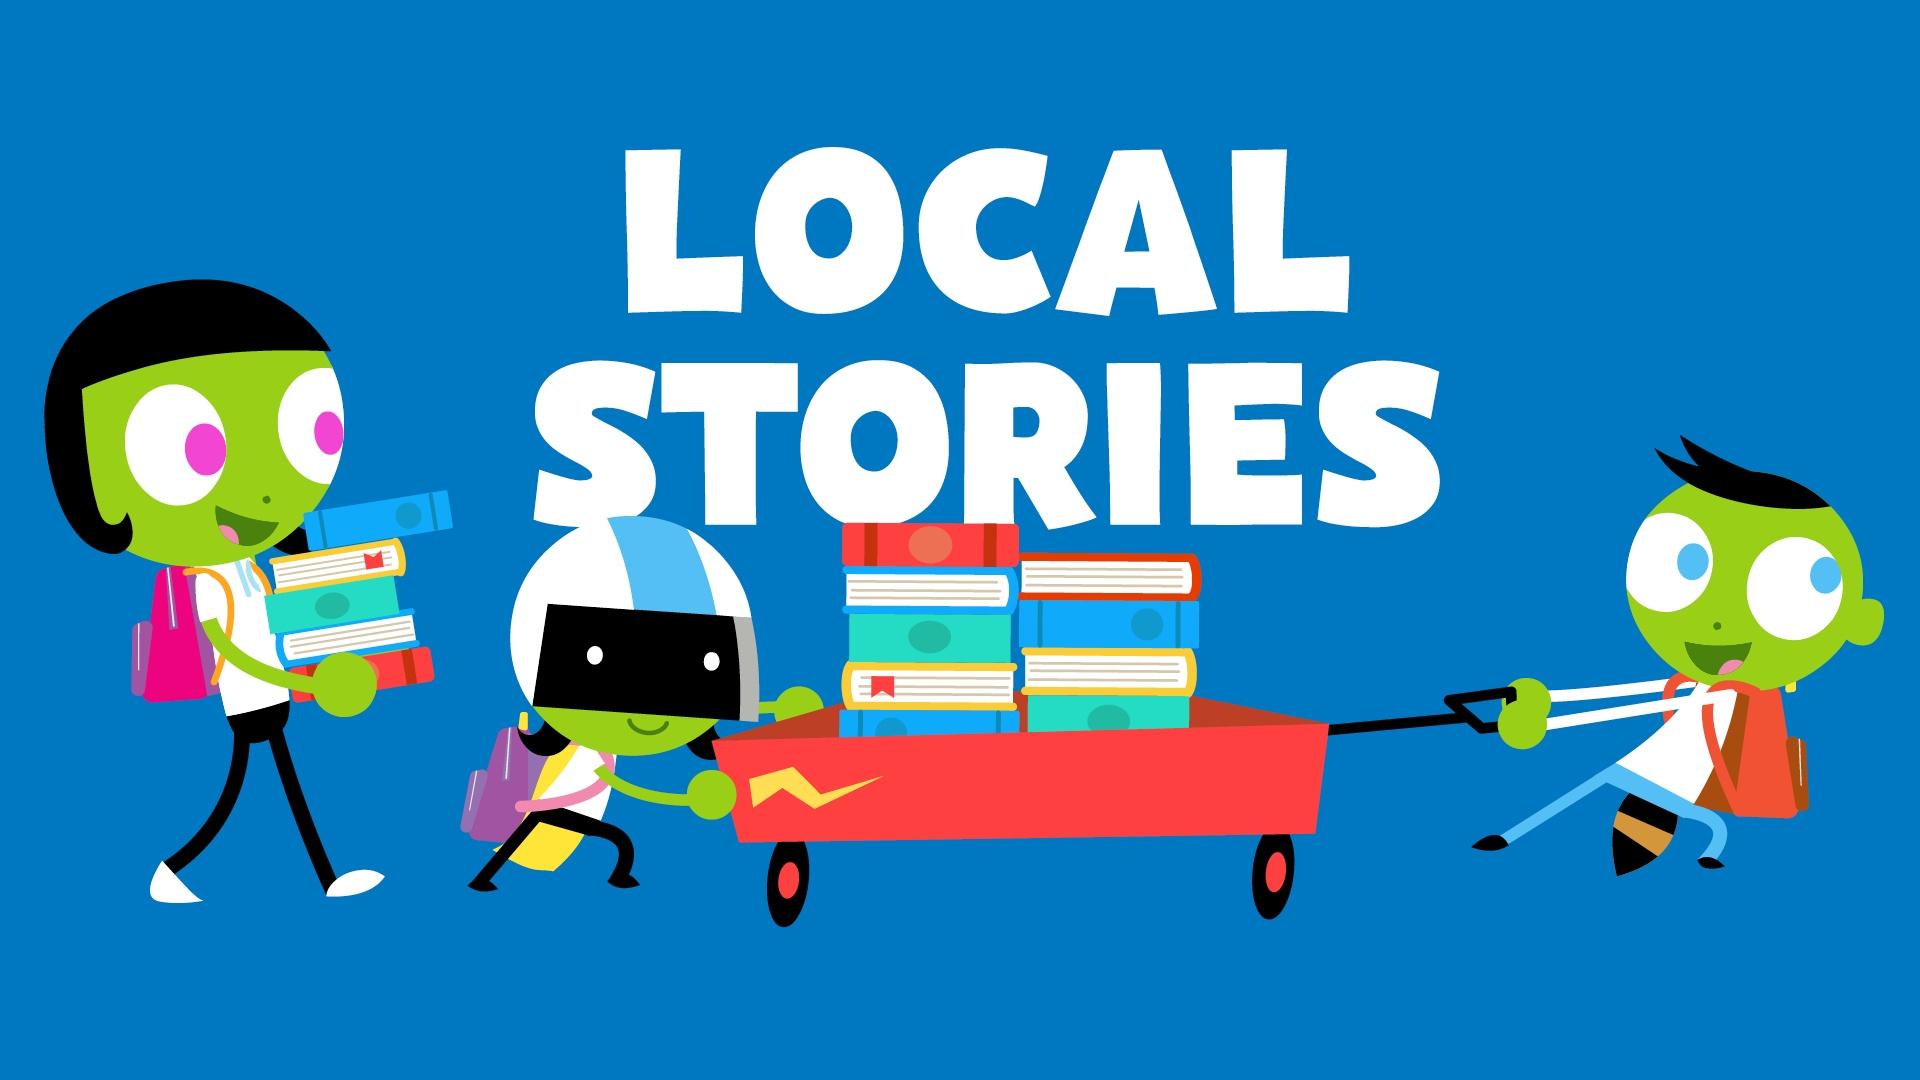 Local Stories - Dash and Dot and friend pull wagon filled with books